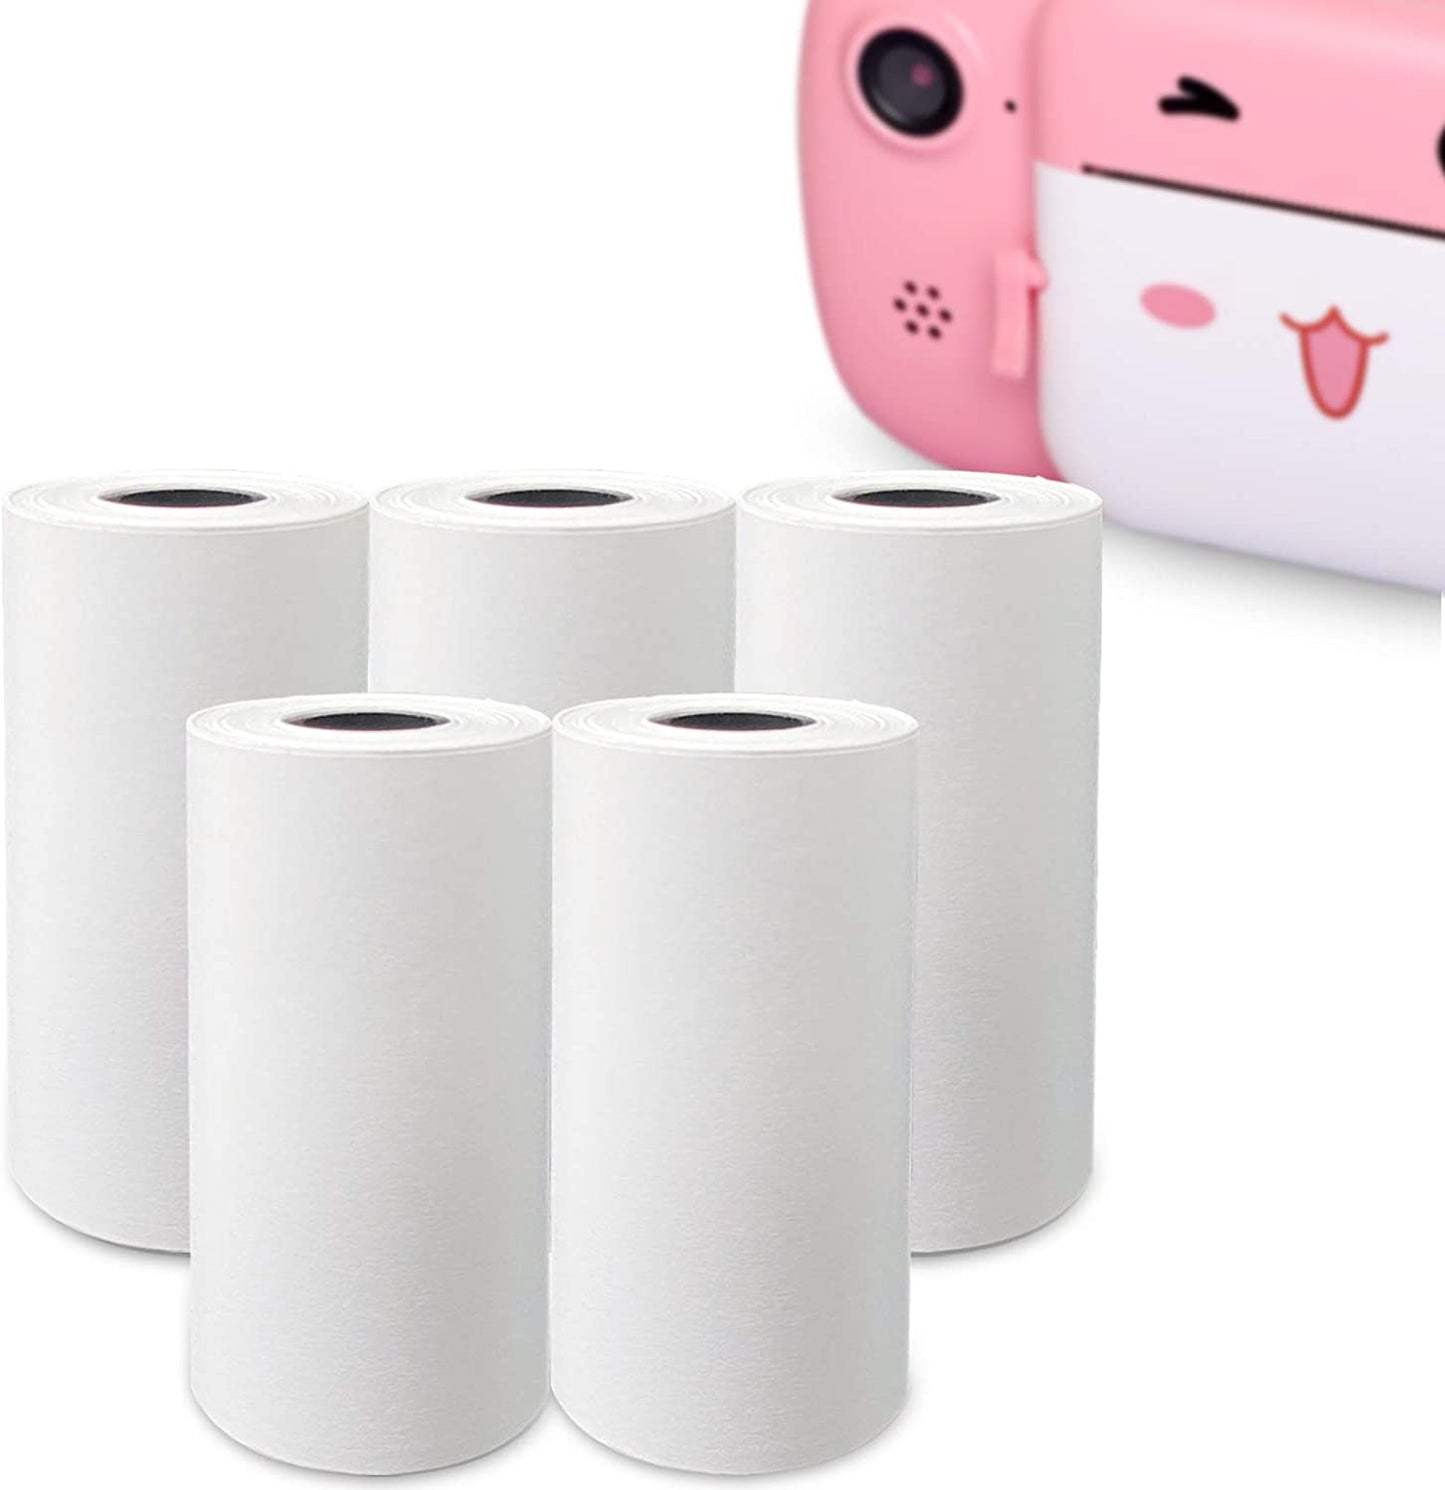 Rolls Print Paper for Kids Instant Print Camera, Zero Ink Thermal Paper, 4x2.2 inch Print Paper, White